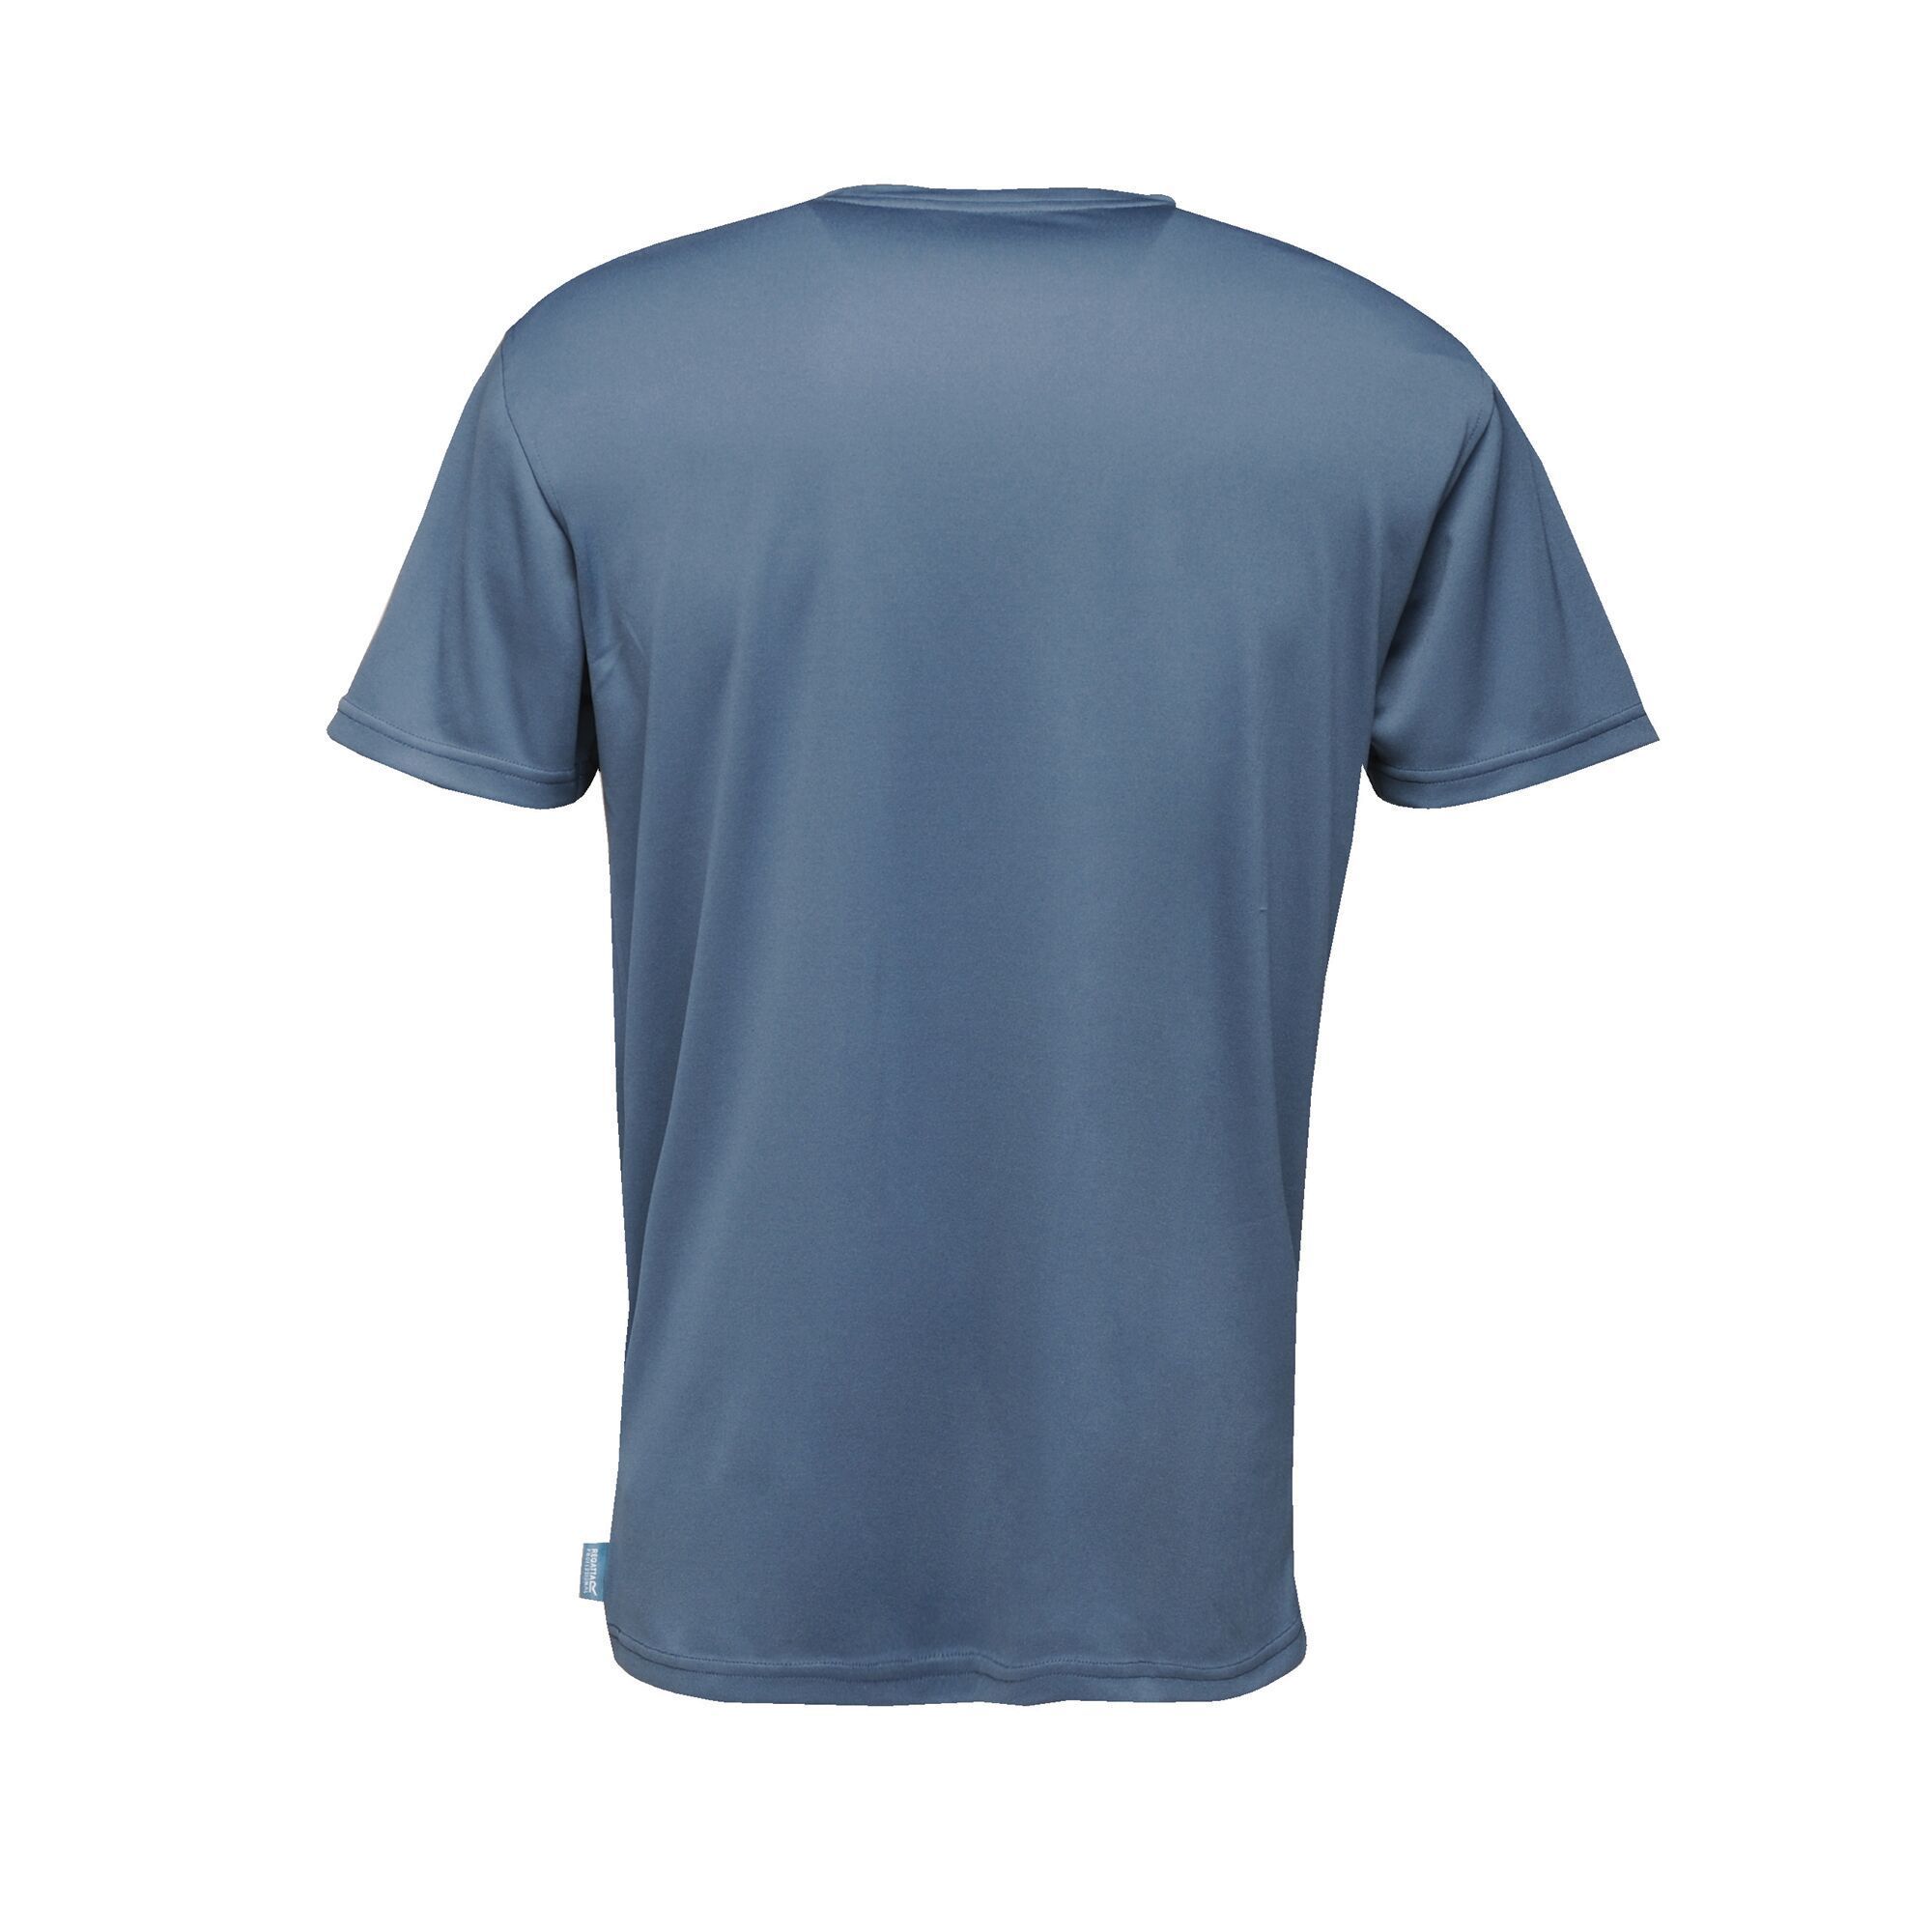 100% quick dry polyester fabric. Good wicking performance. Graphic print.